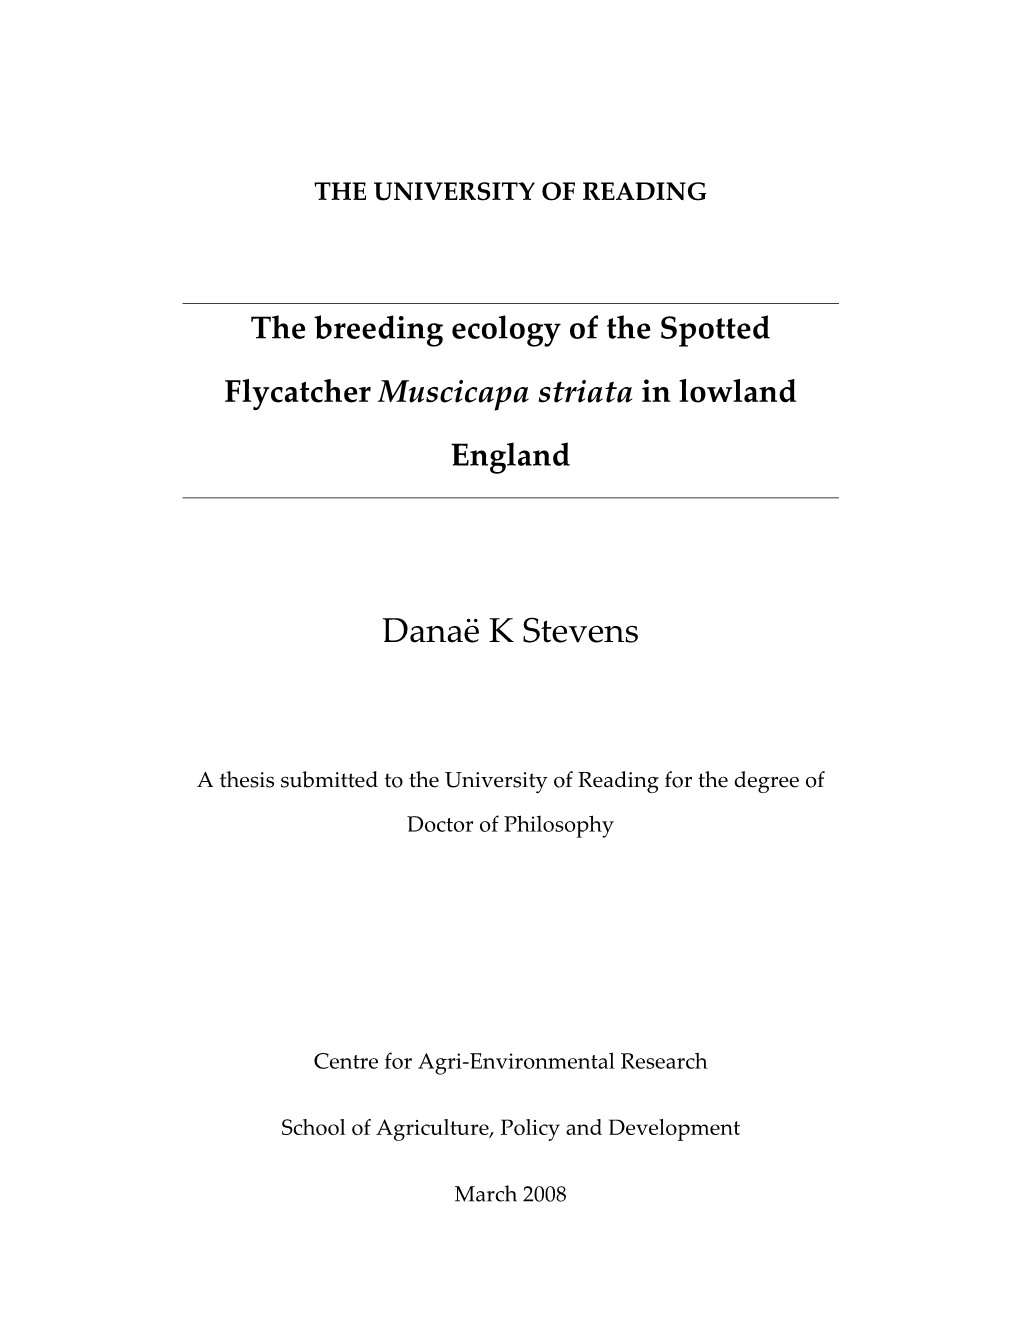 The Breeding Ecology of the Spotted Flycatcher Muscicapa Striata in Lowland England